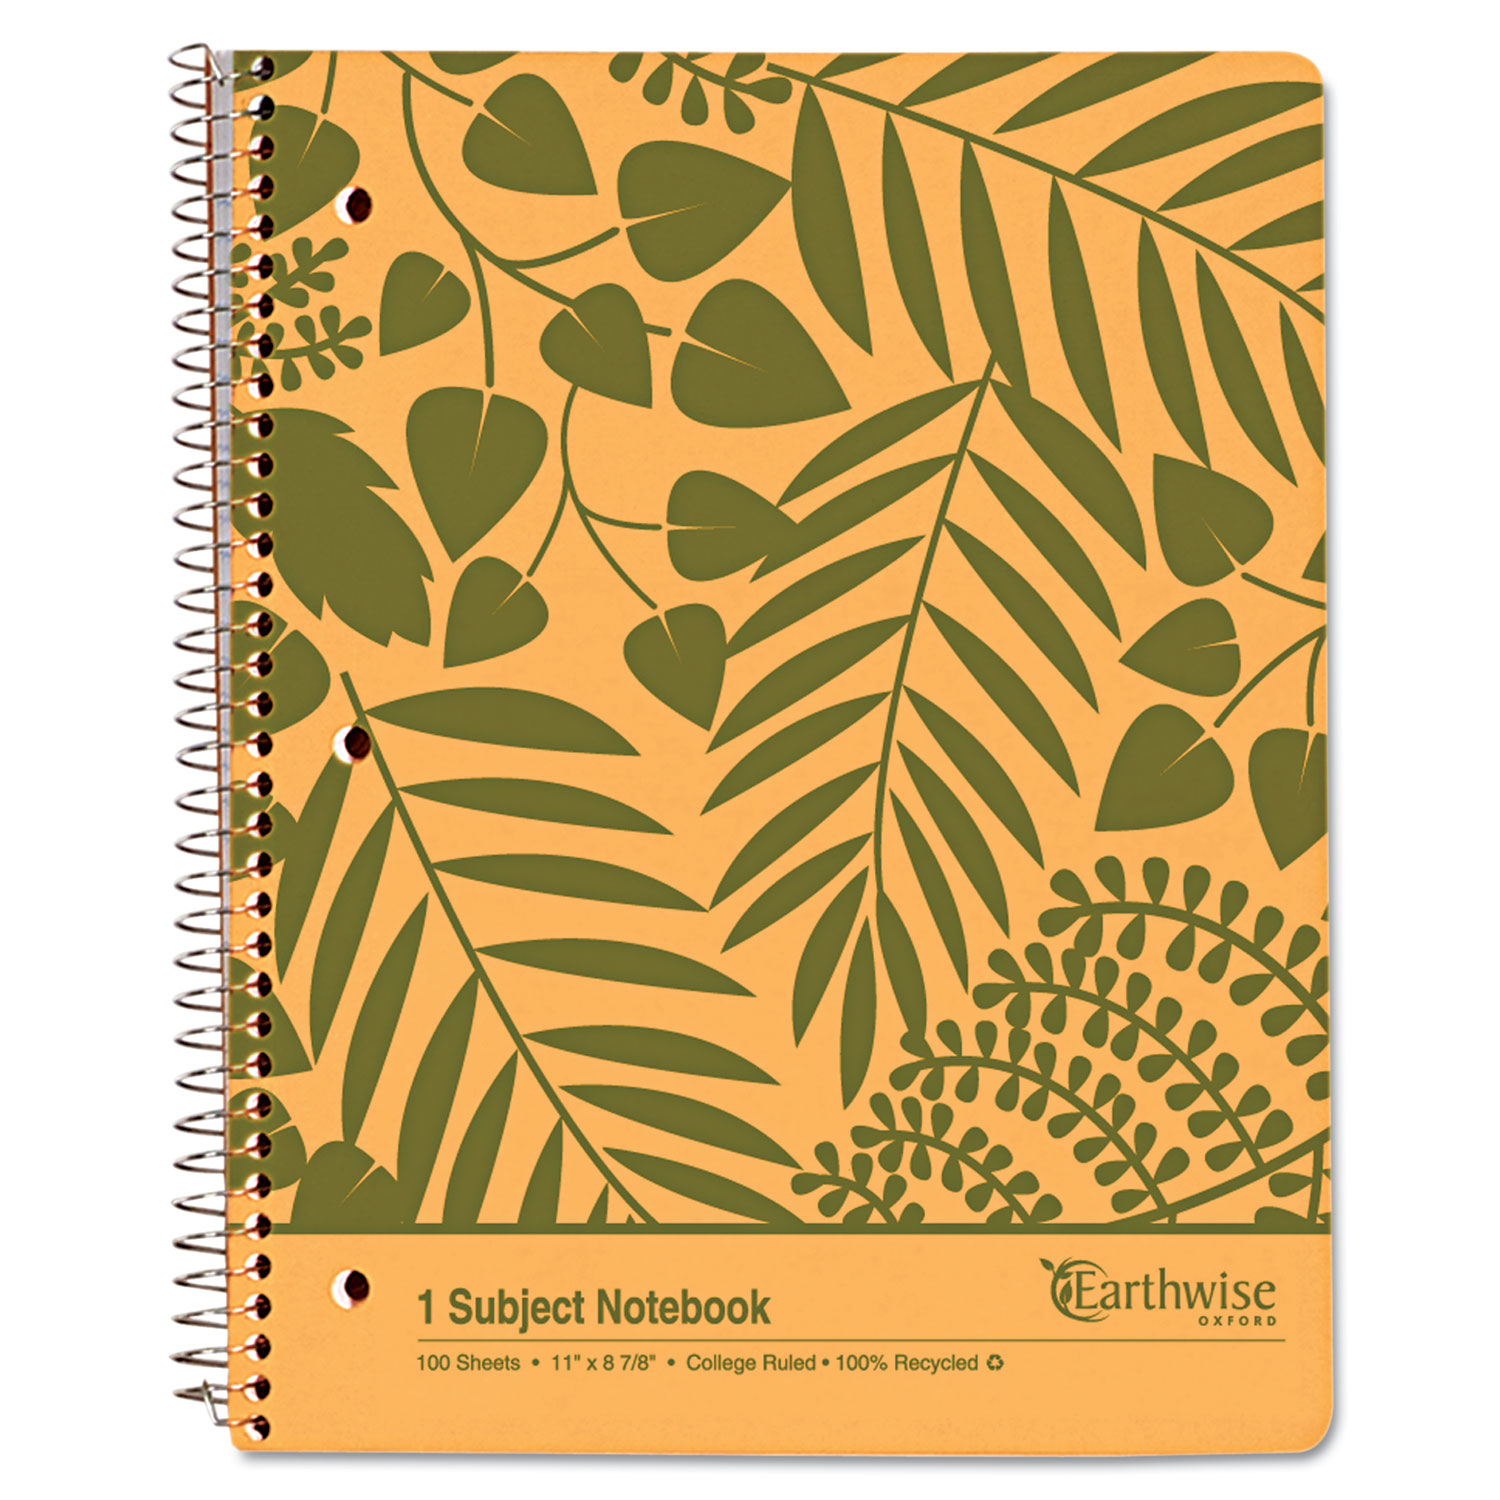 Oxford™ Earthwise by 100% Recycled Notebooks, 1 Subject, Medium/College Rule, Tan Cover, 11 x 8.88, 100 Sheets